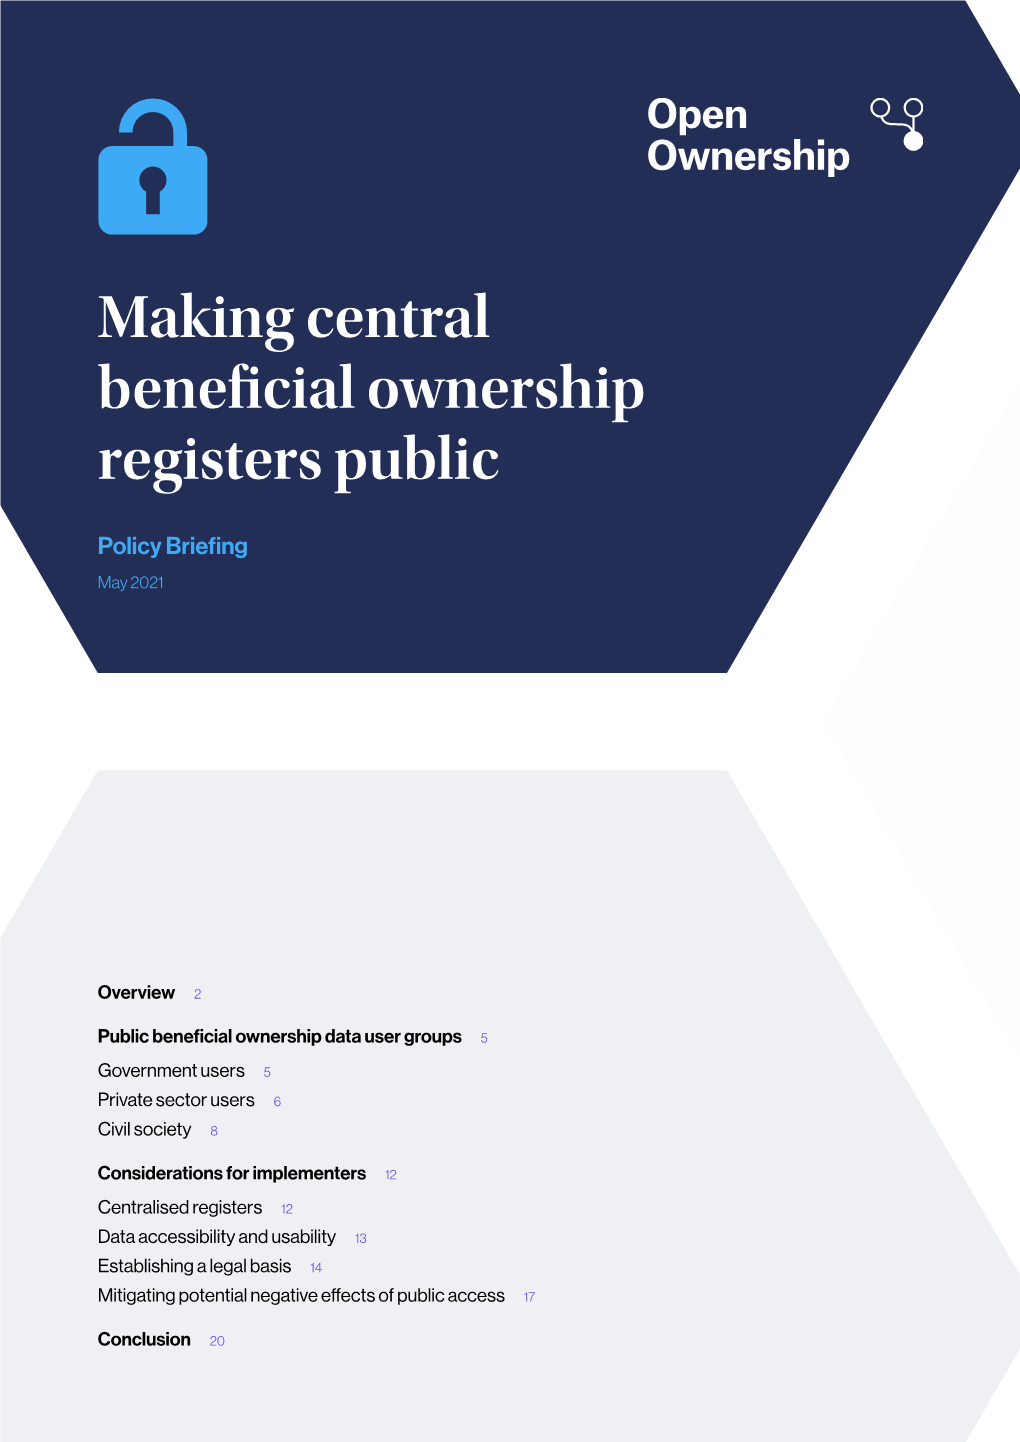 Making Central Beneficial Ownership Registers Public